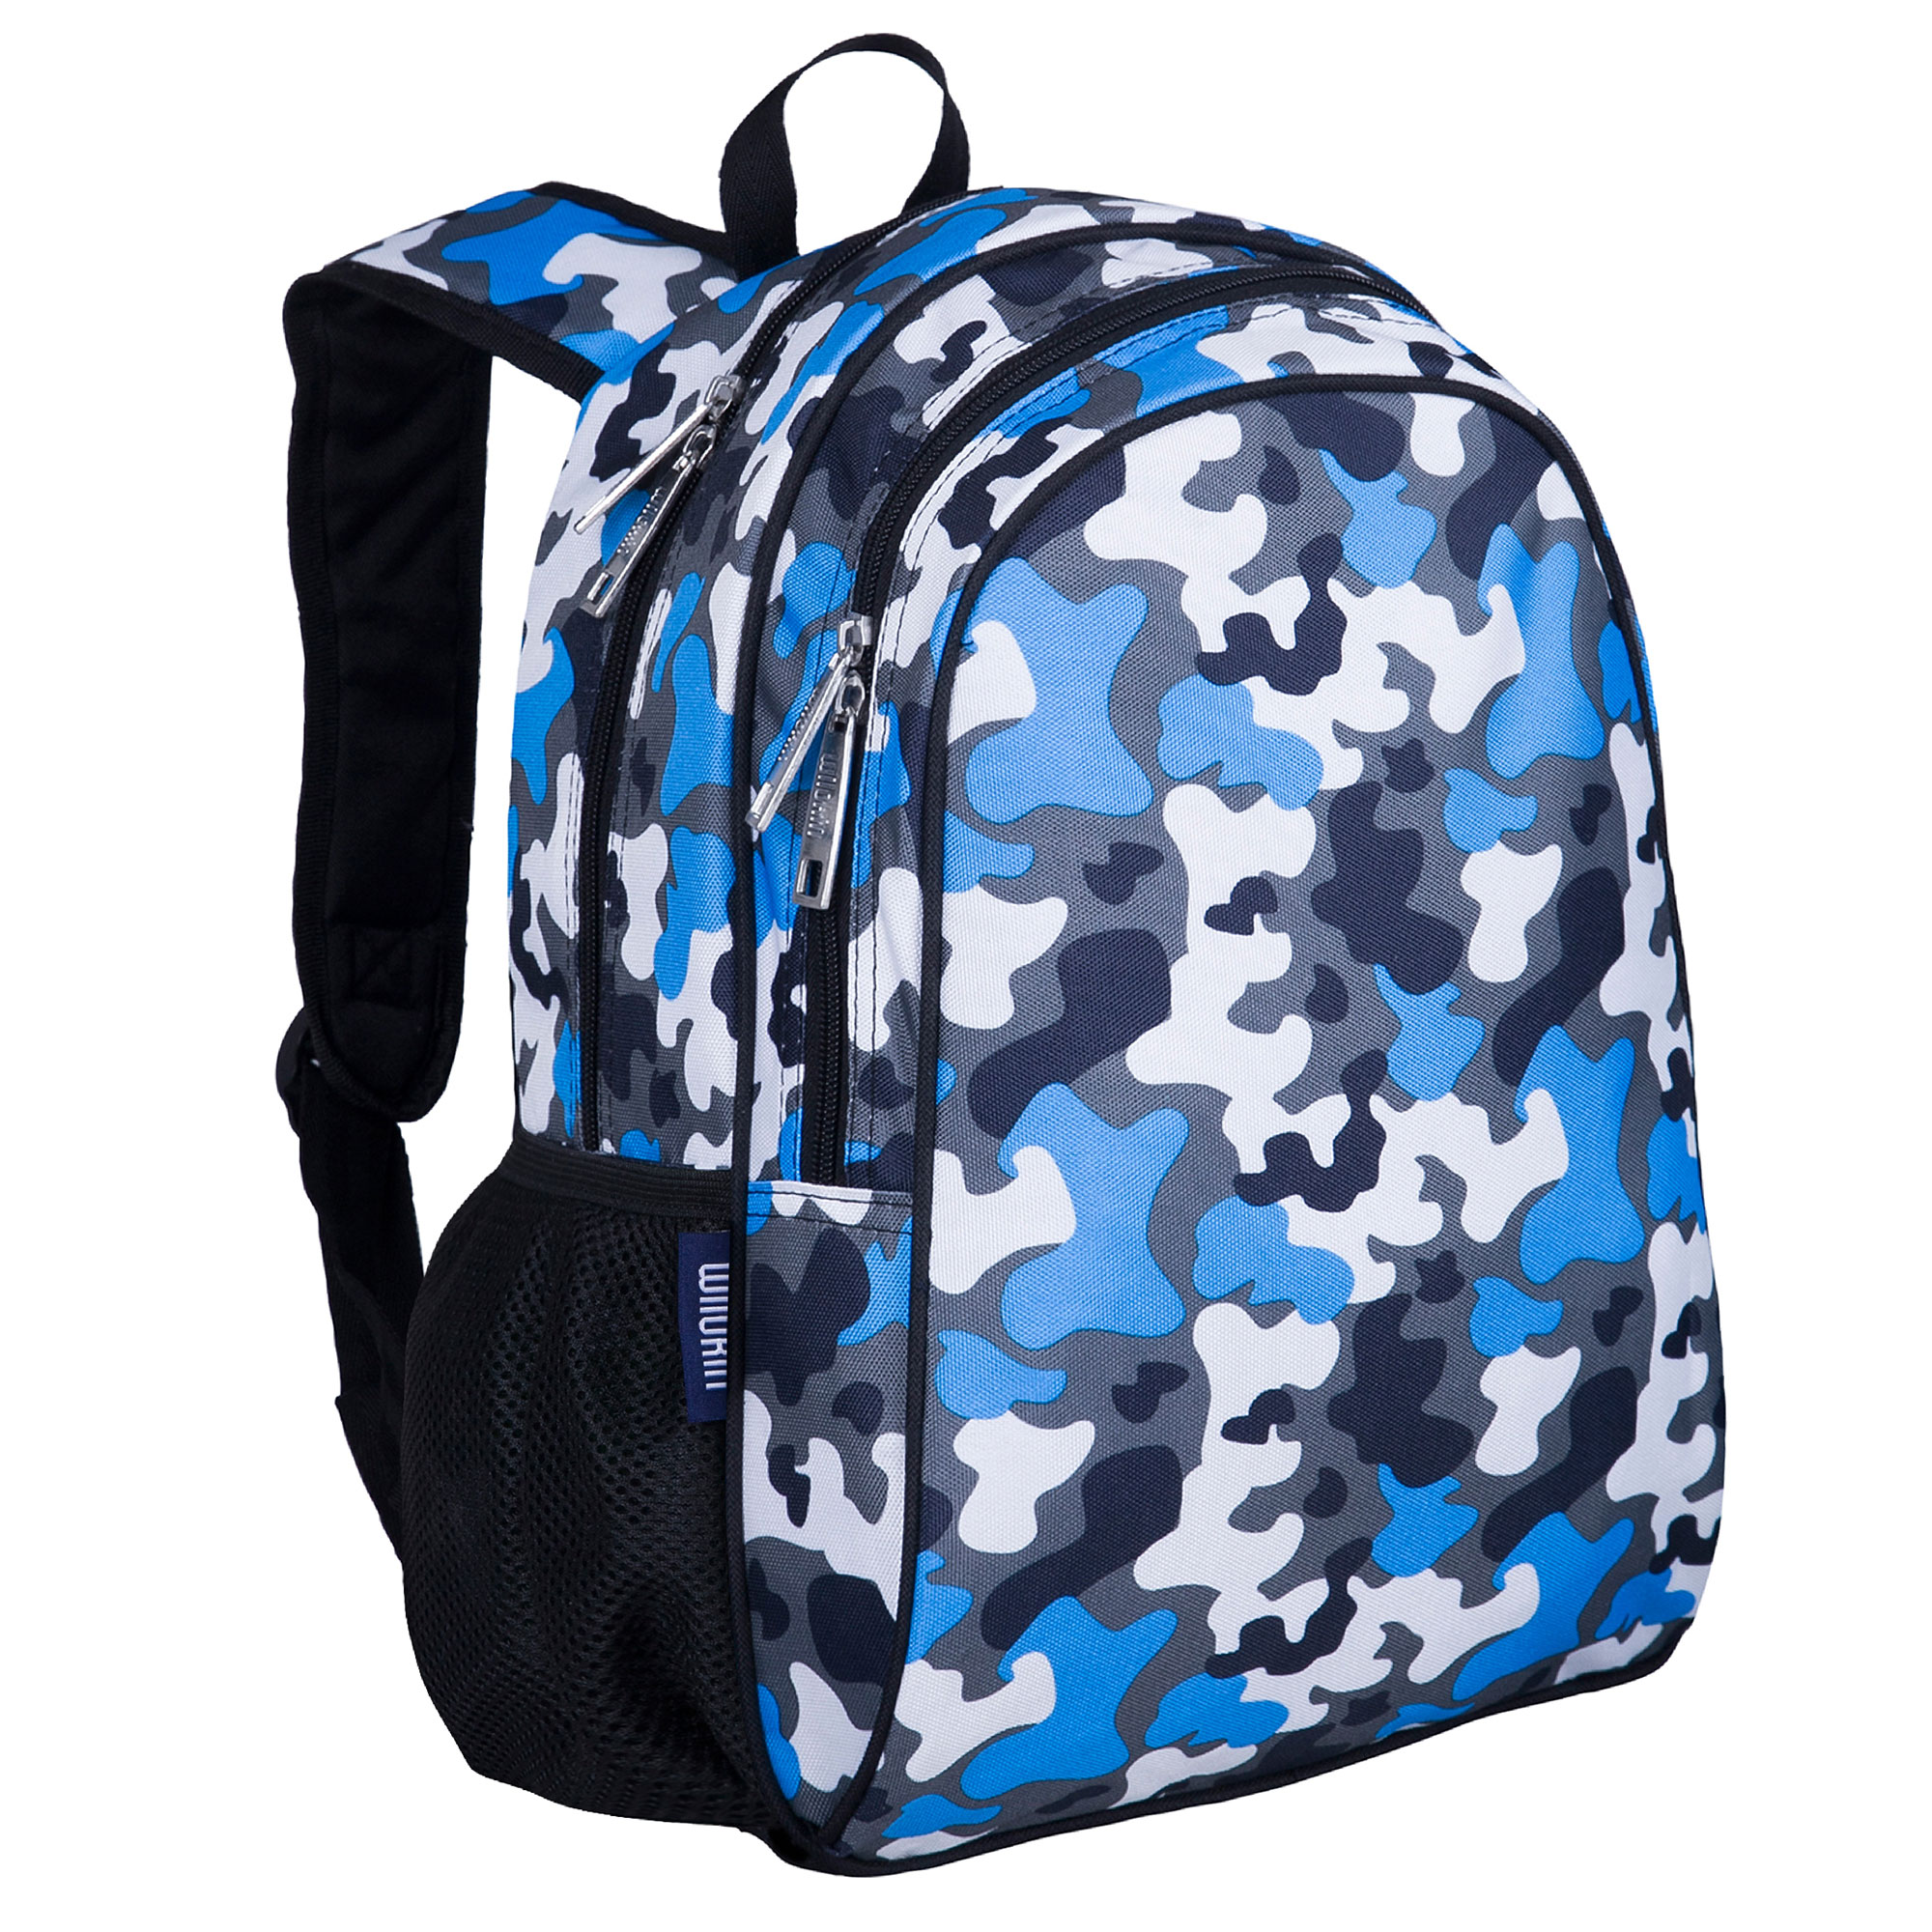 Wildkin Kids 15 Inch School and Travel Backpack for Boys and Girls (Blue Camo) - image 1 of 7